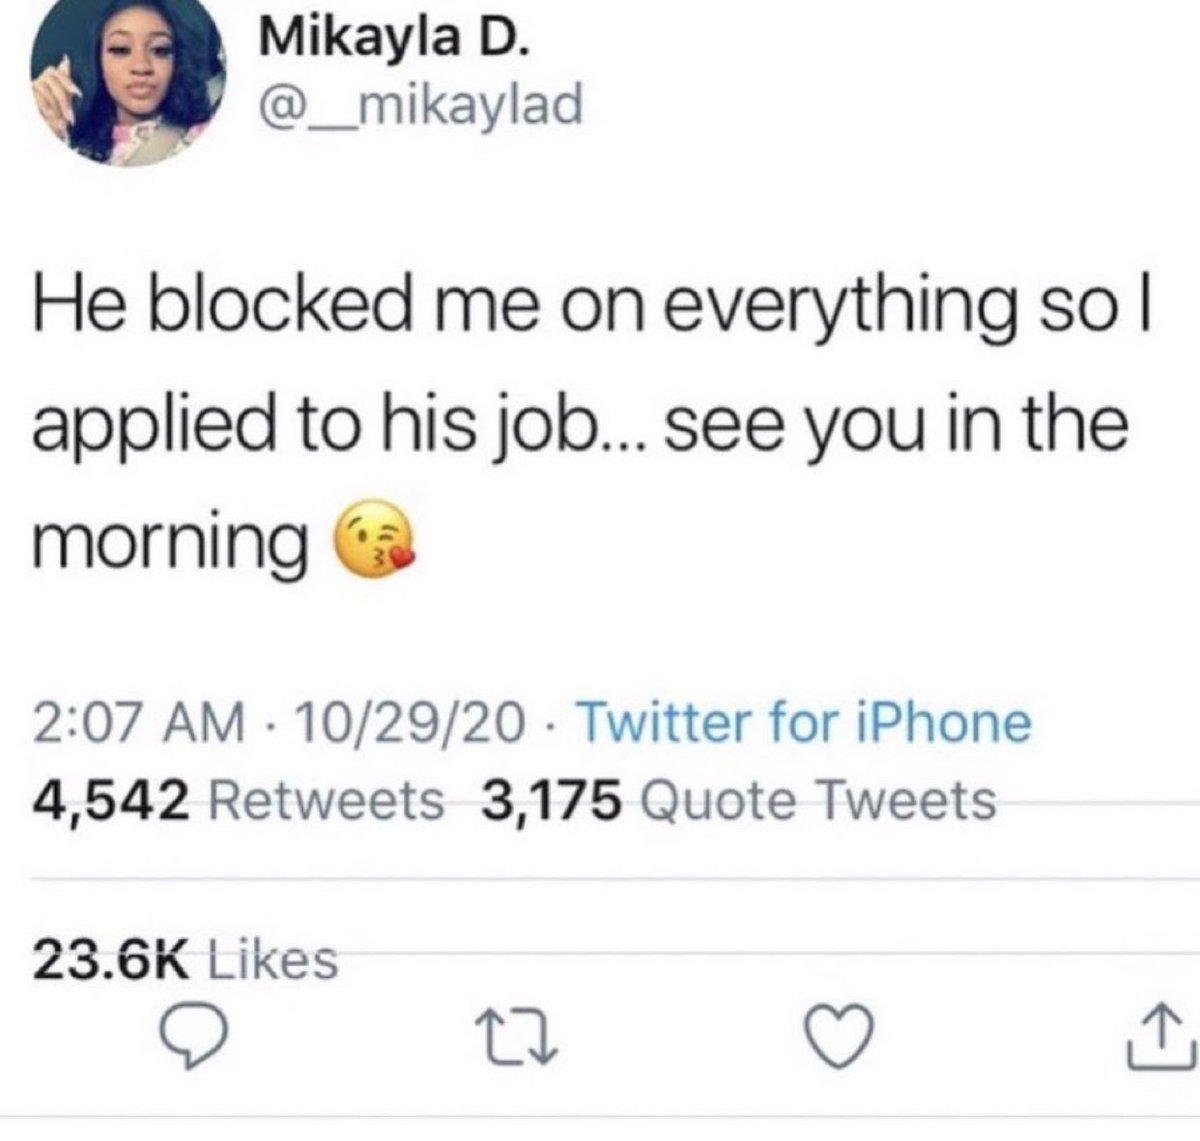 wtf tweets - Mikayla D. He blocked me on everything sol applied to his job... see you in the morning 102920 Twitter for iPhone 4,542 3,175 Quote Tweets 27